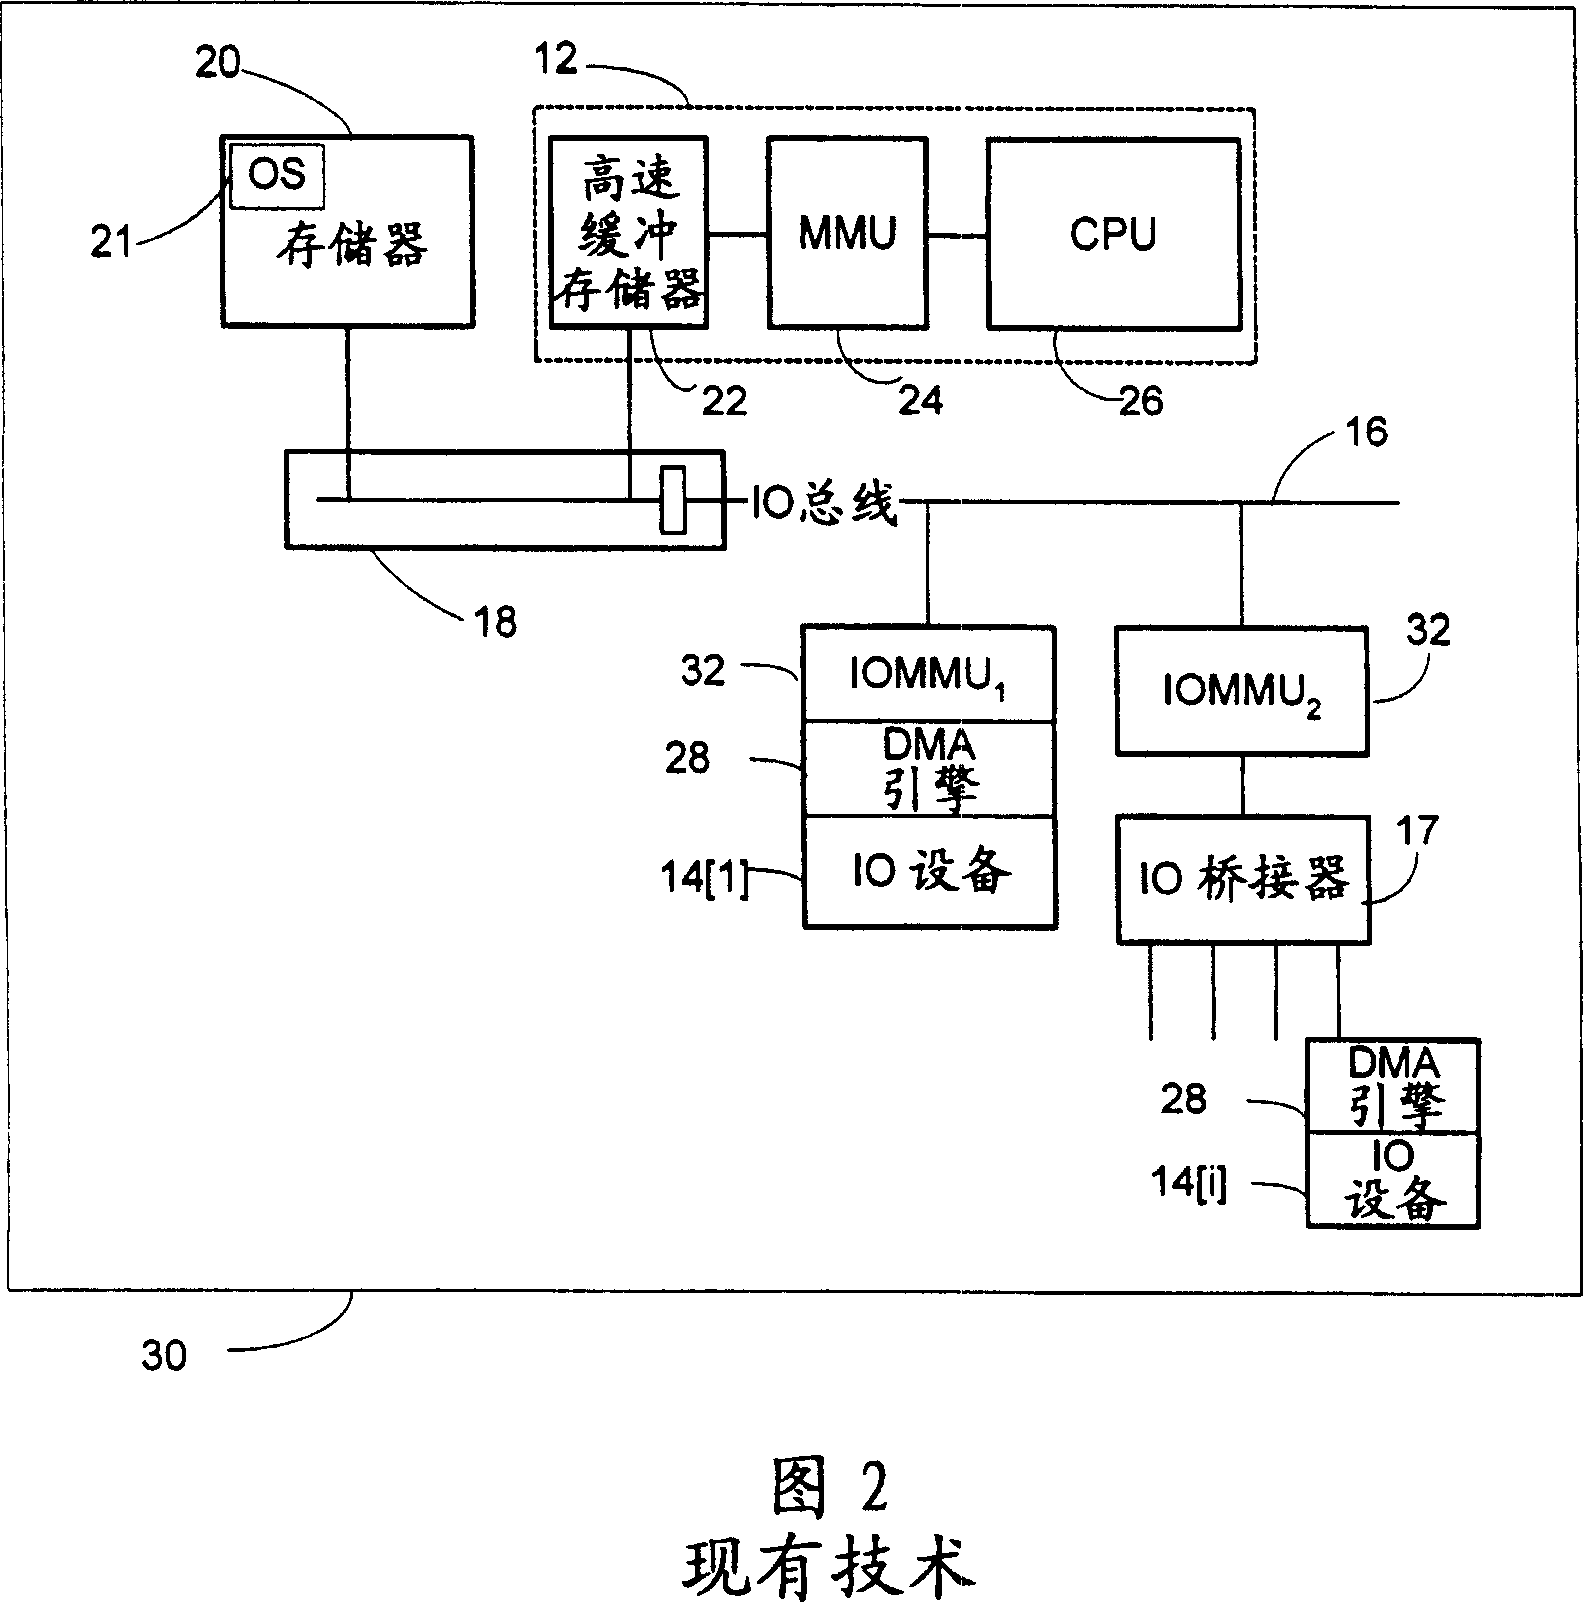 Method and system for memory protection and security using credentials